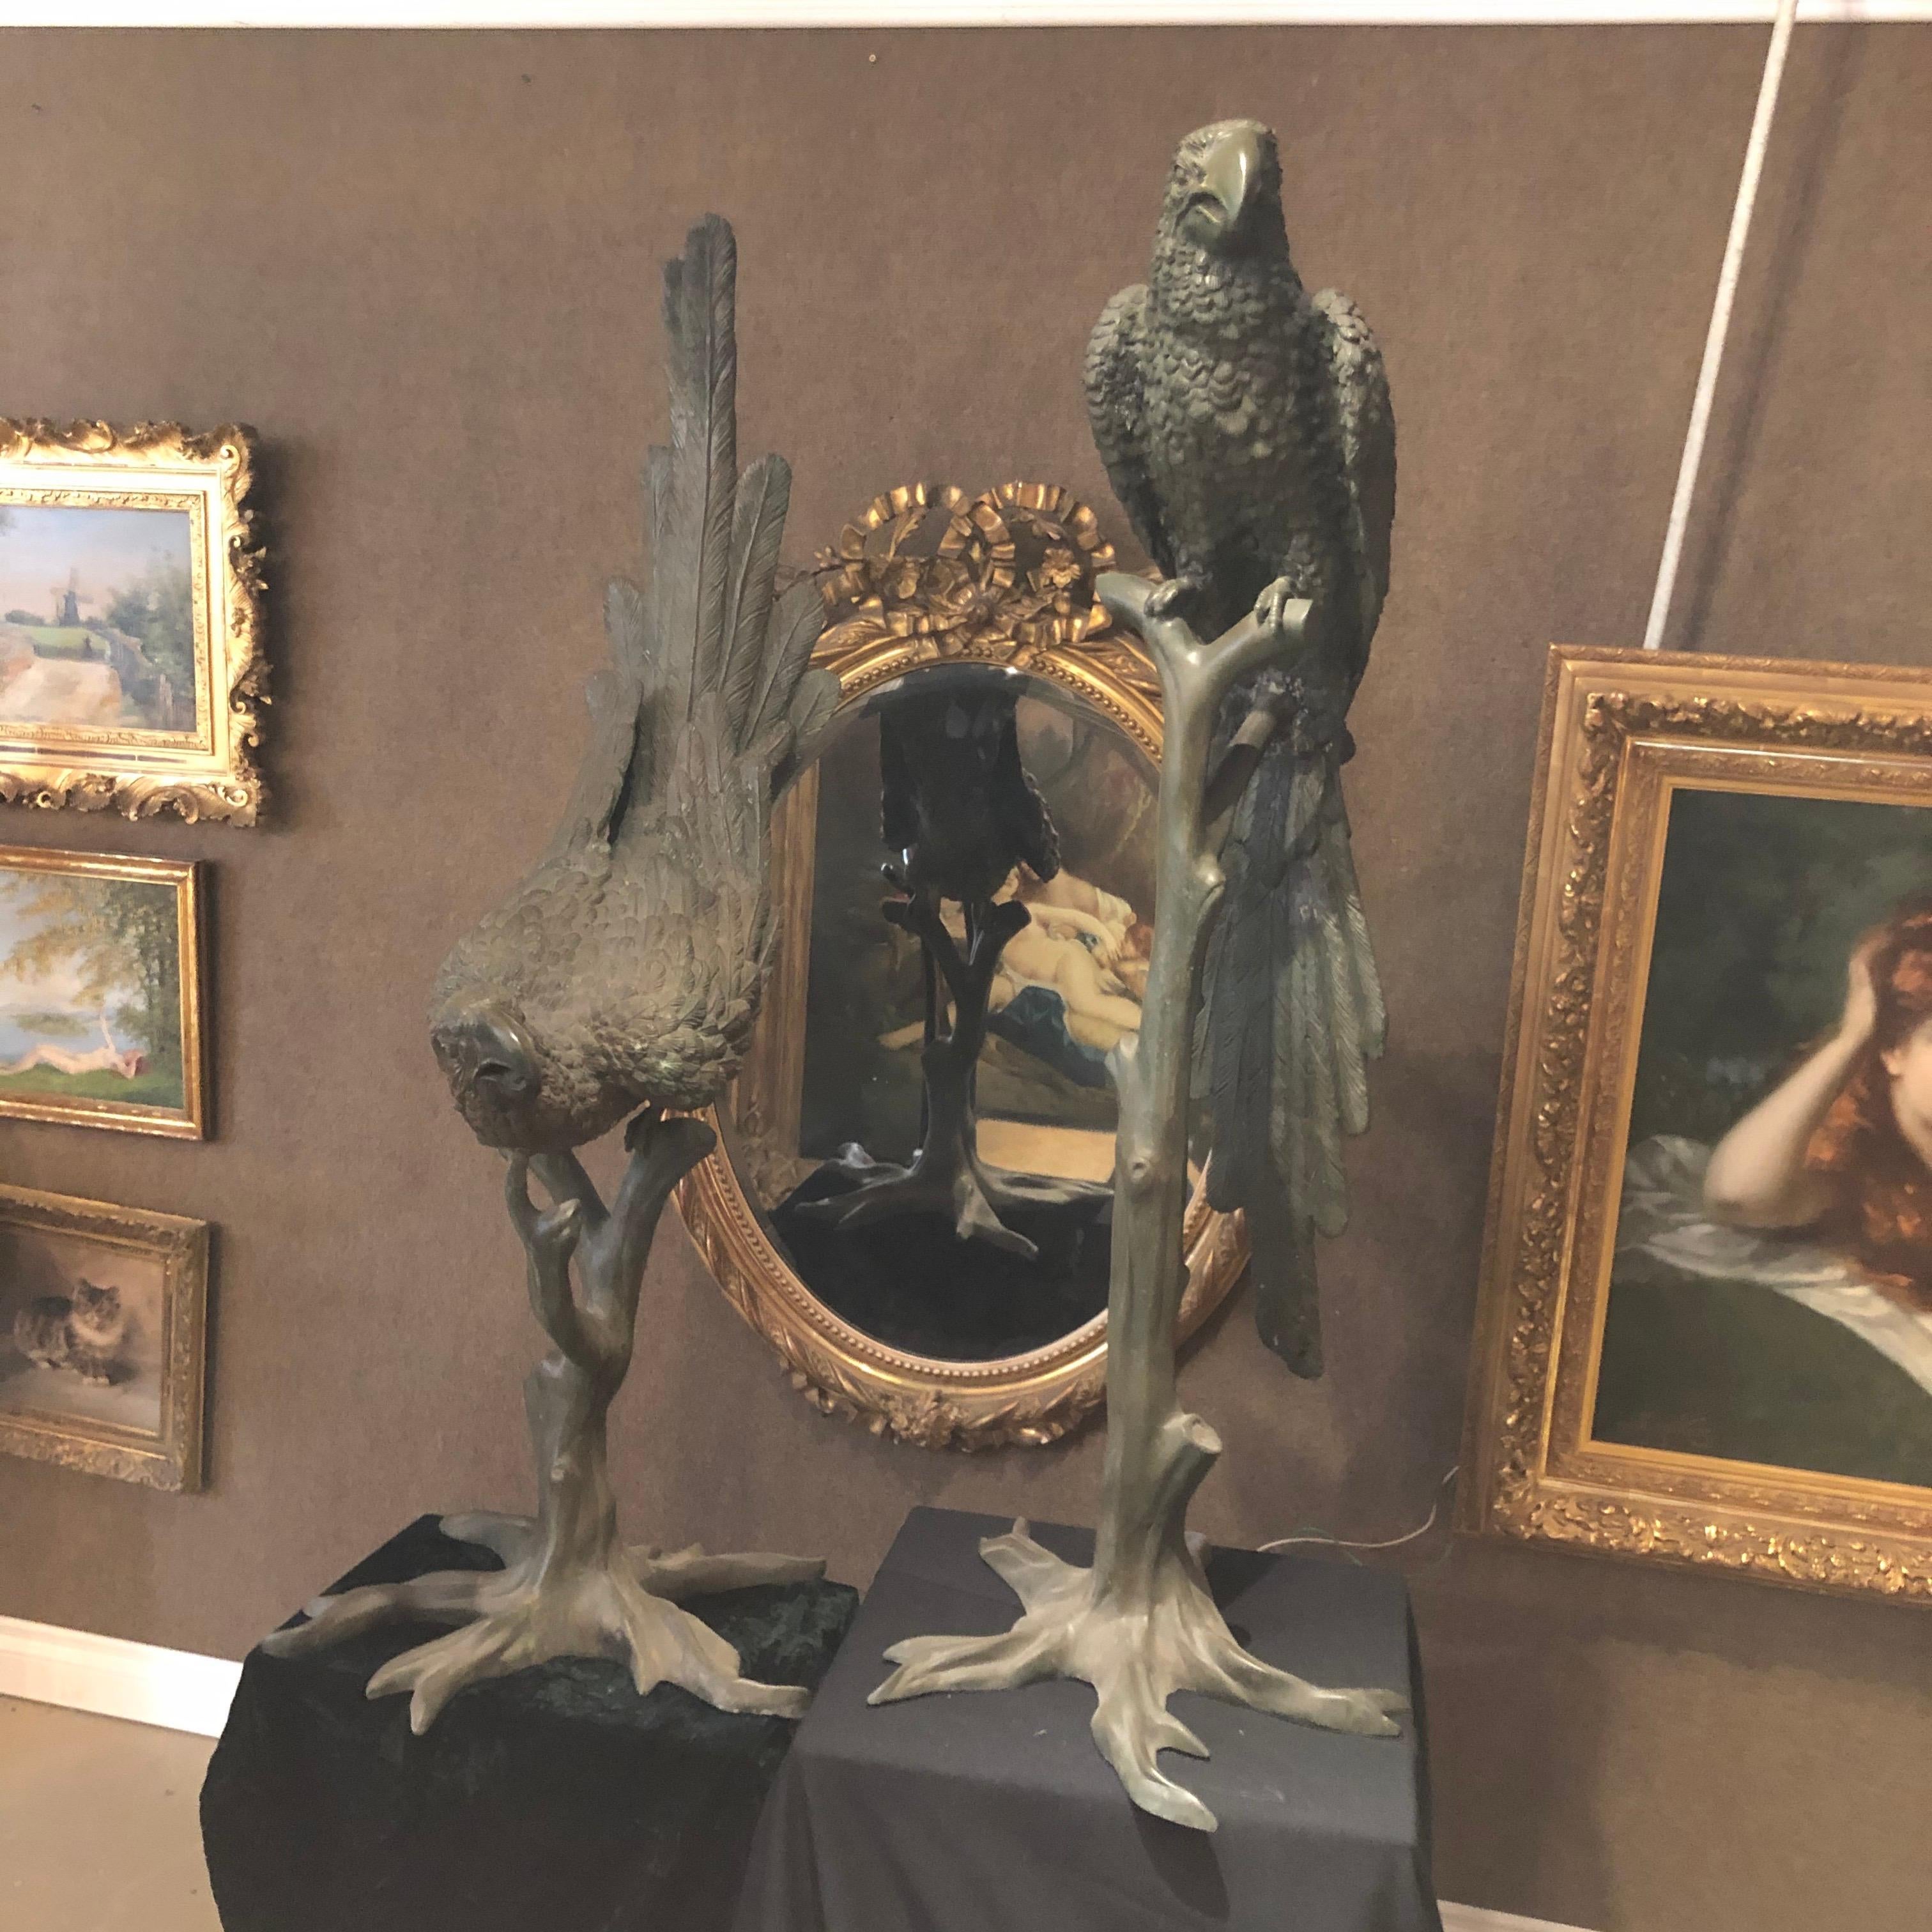 Life size pair of French patinated bronze male & female parrots on branches, circa 1950, standing 51” tall these fabulous cast parrots are as charming as they come. Having a soft tree green color with exquisite detail and quality craftsmanship.